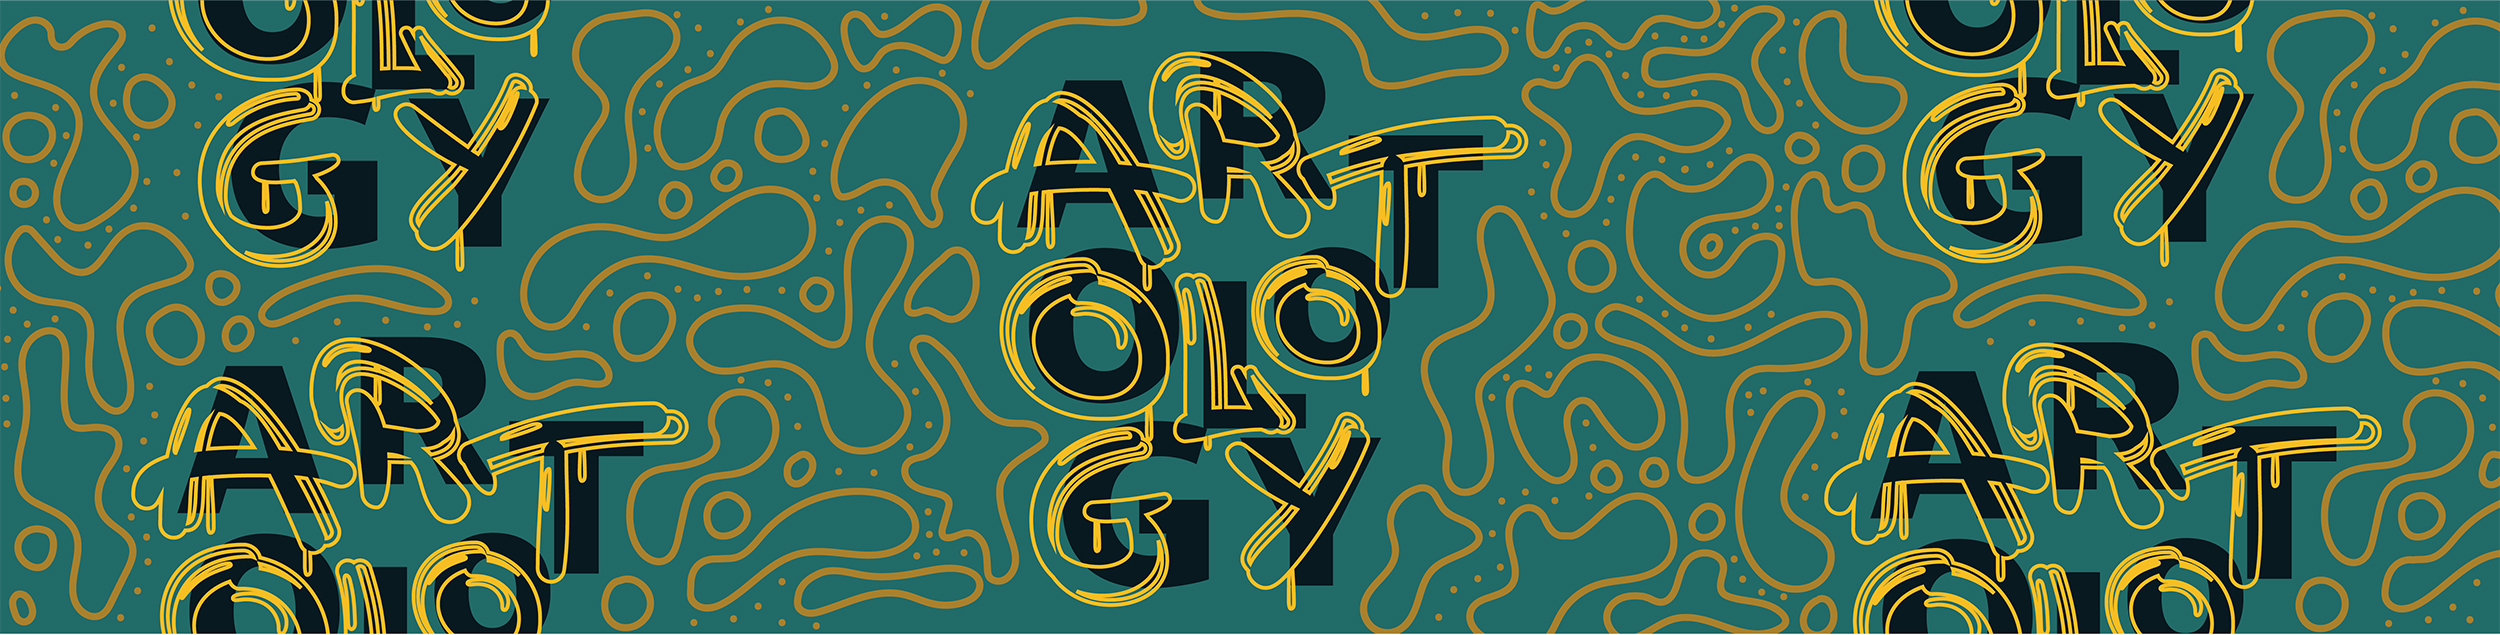 Artology Student Exhibition Banner Page Banner